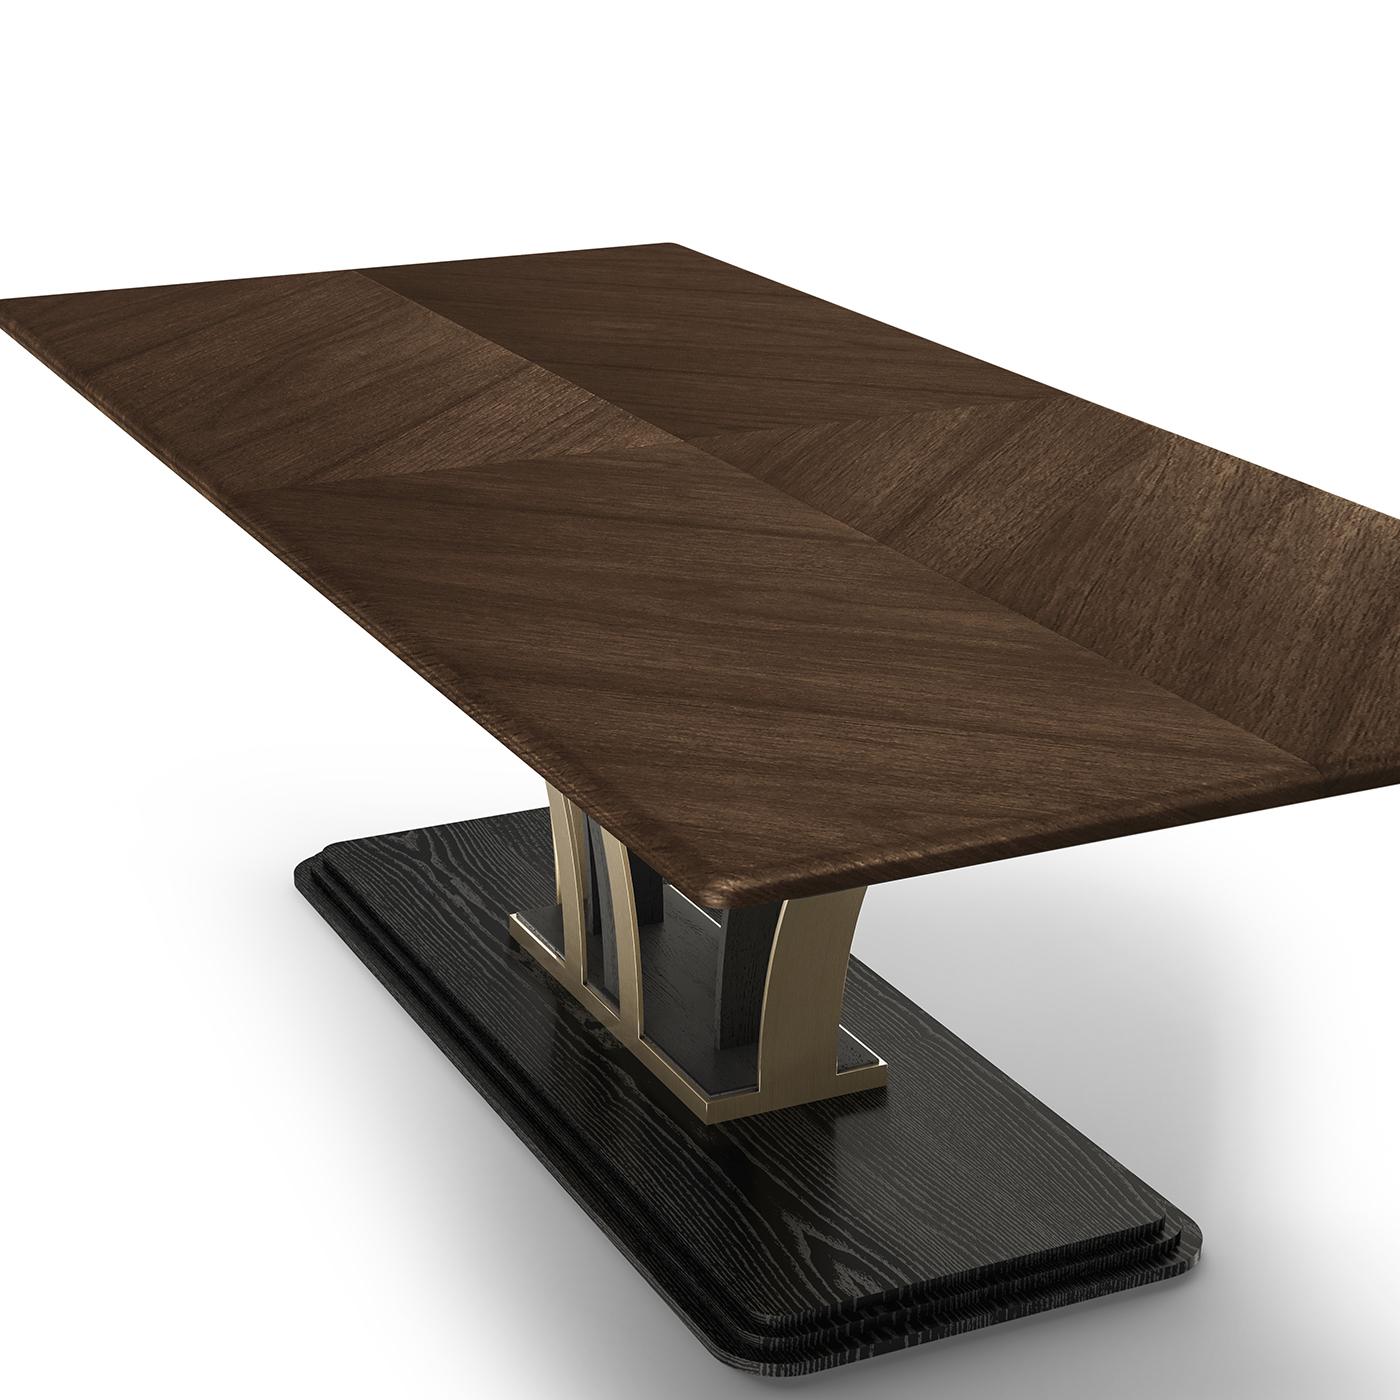 The striking base of this dining table creates a geometric symmetry of curved elements that perfectly showcases a Canaletto walnut rectangular top enriched with halo-shaped inlay work. The structure of the table is in plywood and flamed ash-veneered